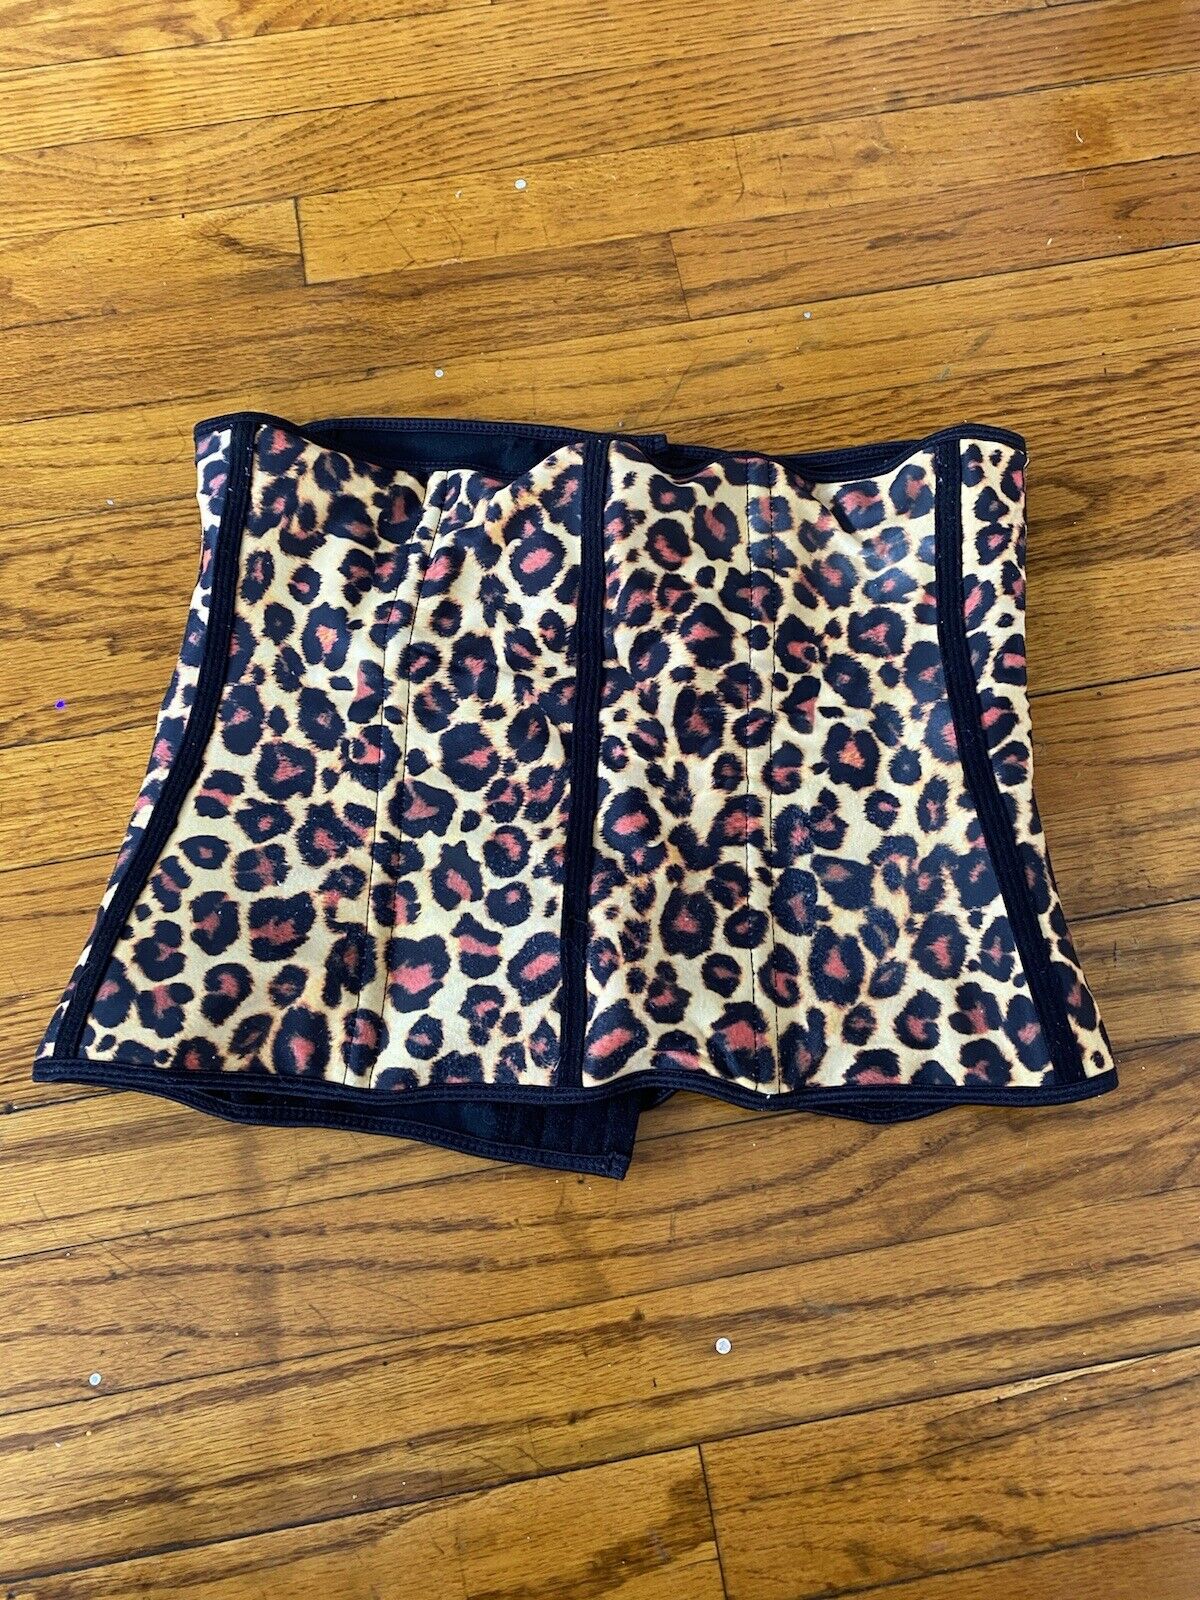 Cheetah Print Corset Top - Unbranded - Size S/M # 1915